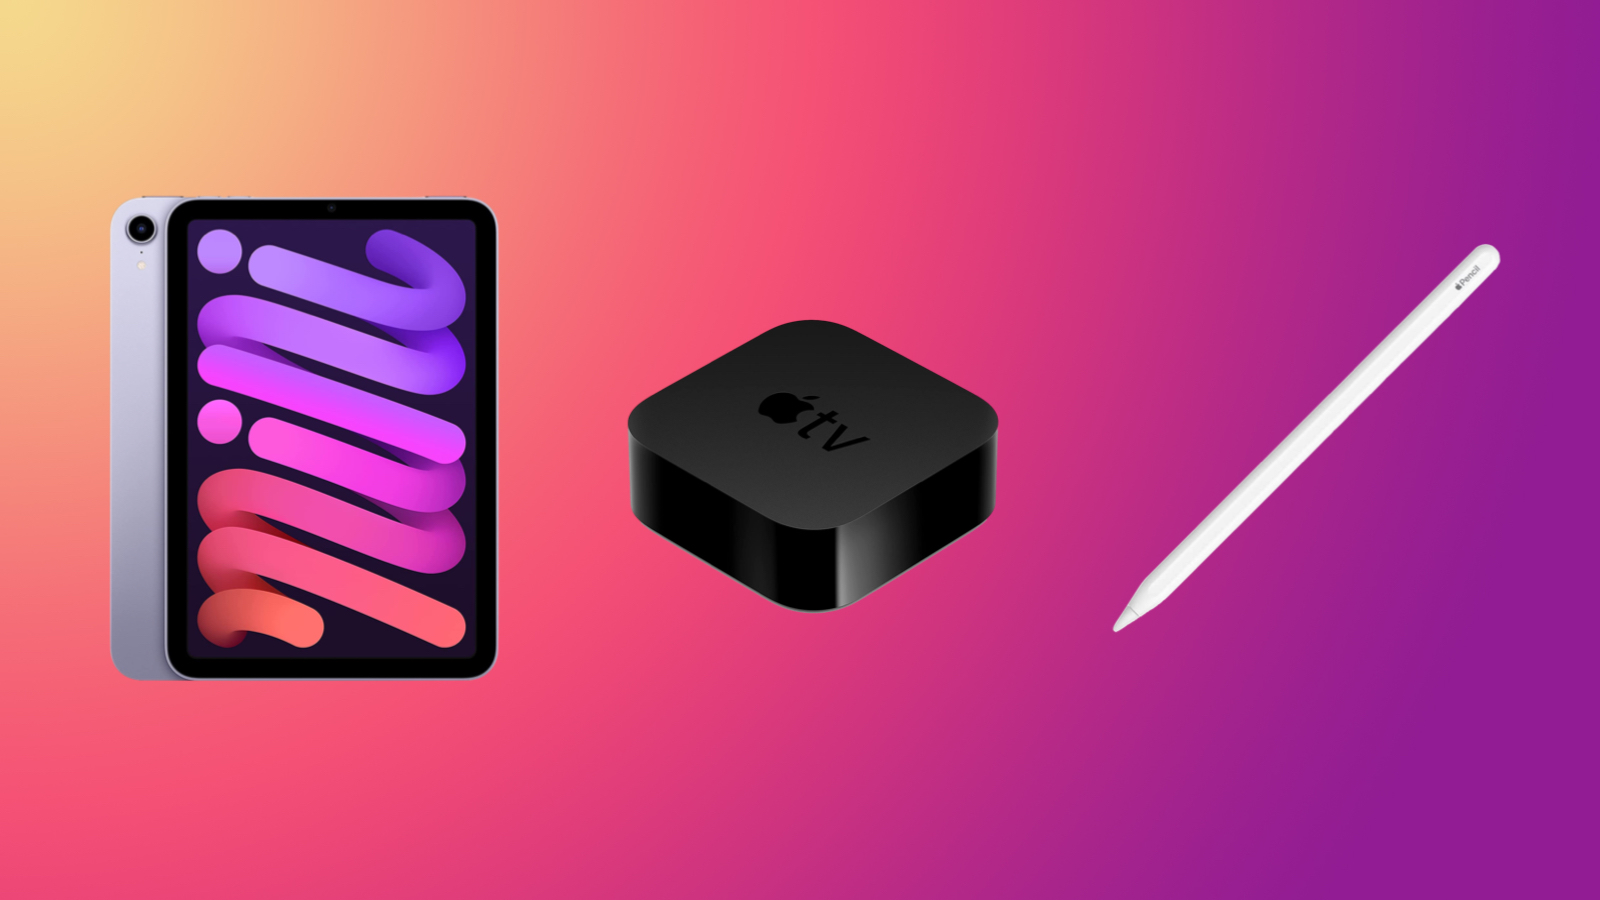 Weekend Deals: Apple TV Drops to Record Low of $129.99 as iPad Mini and Apple Pencil 2 Match All-Time Lows